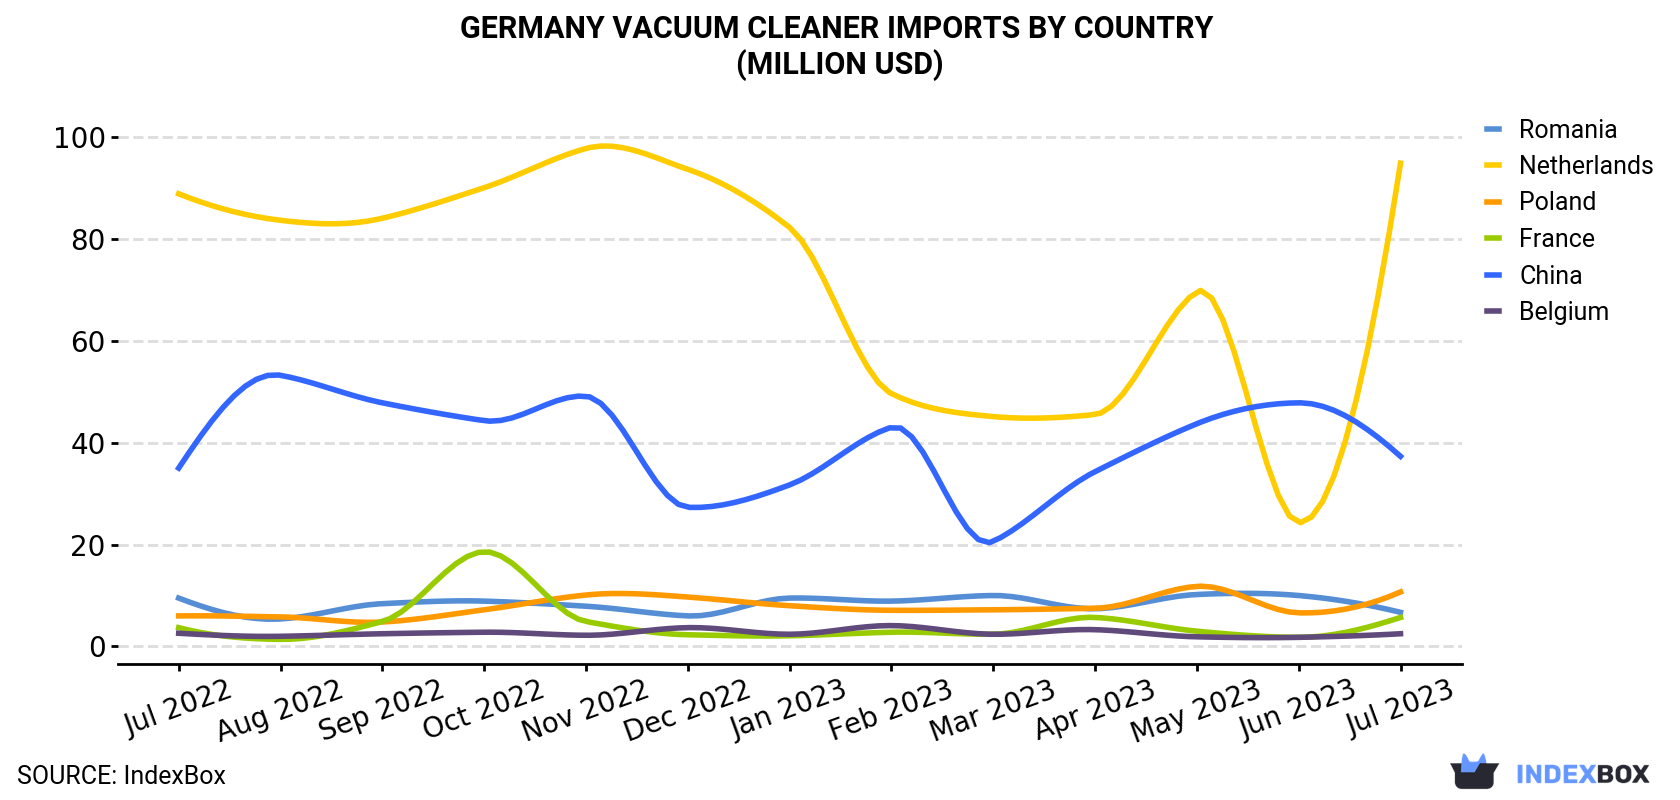 Germany Vacuum Cleaner Imports By Country (Million USD)